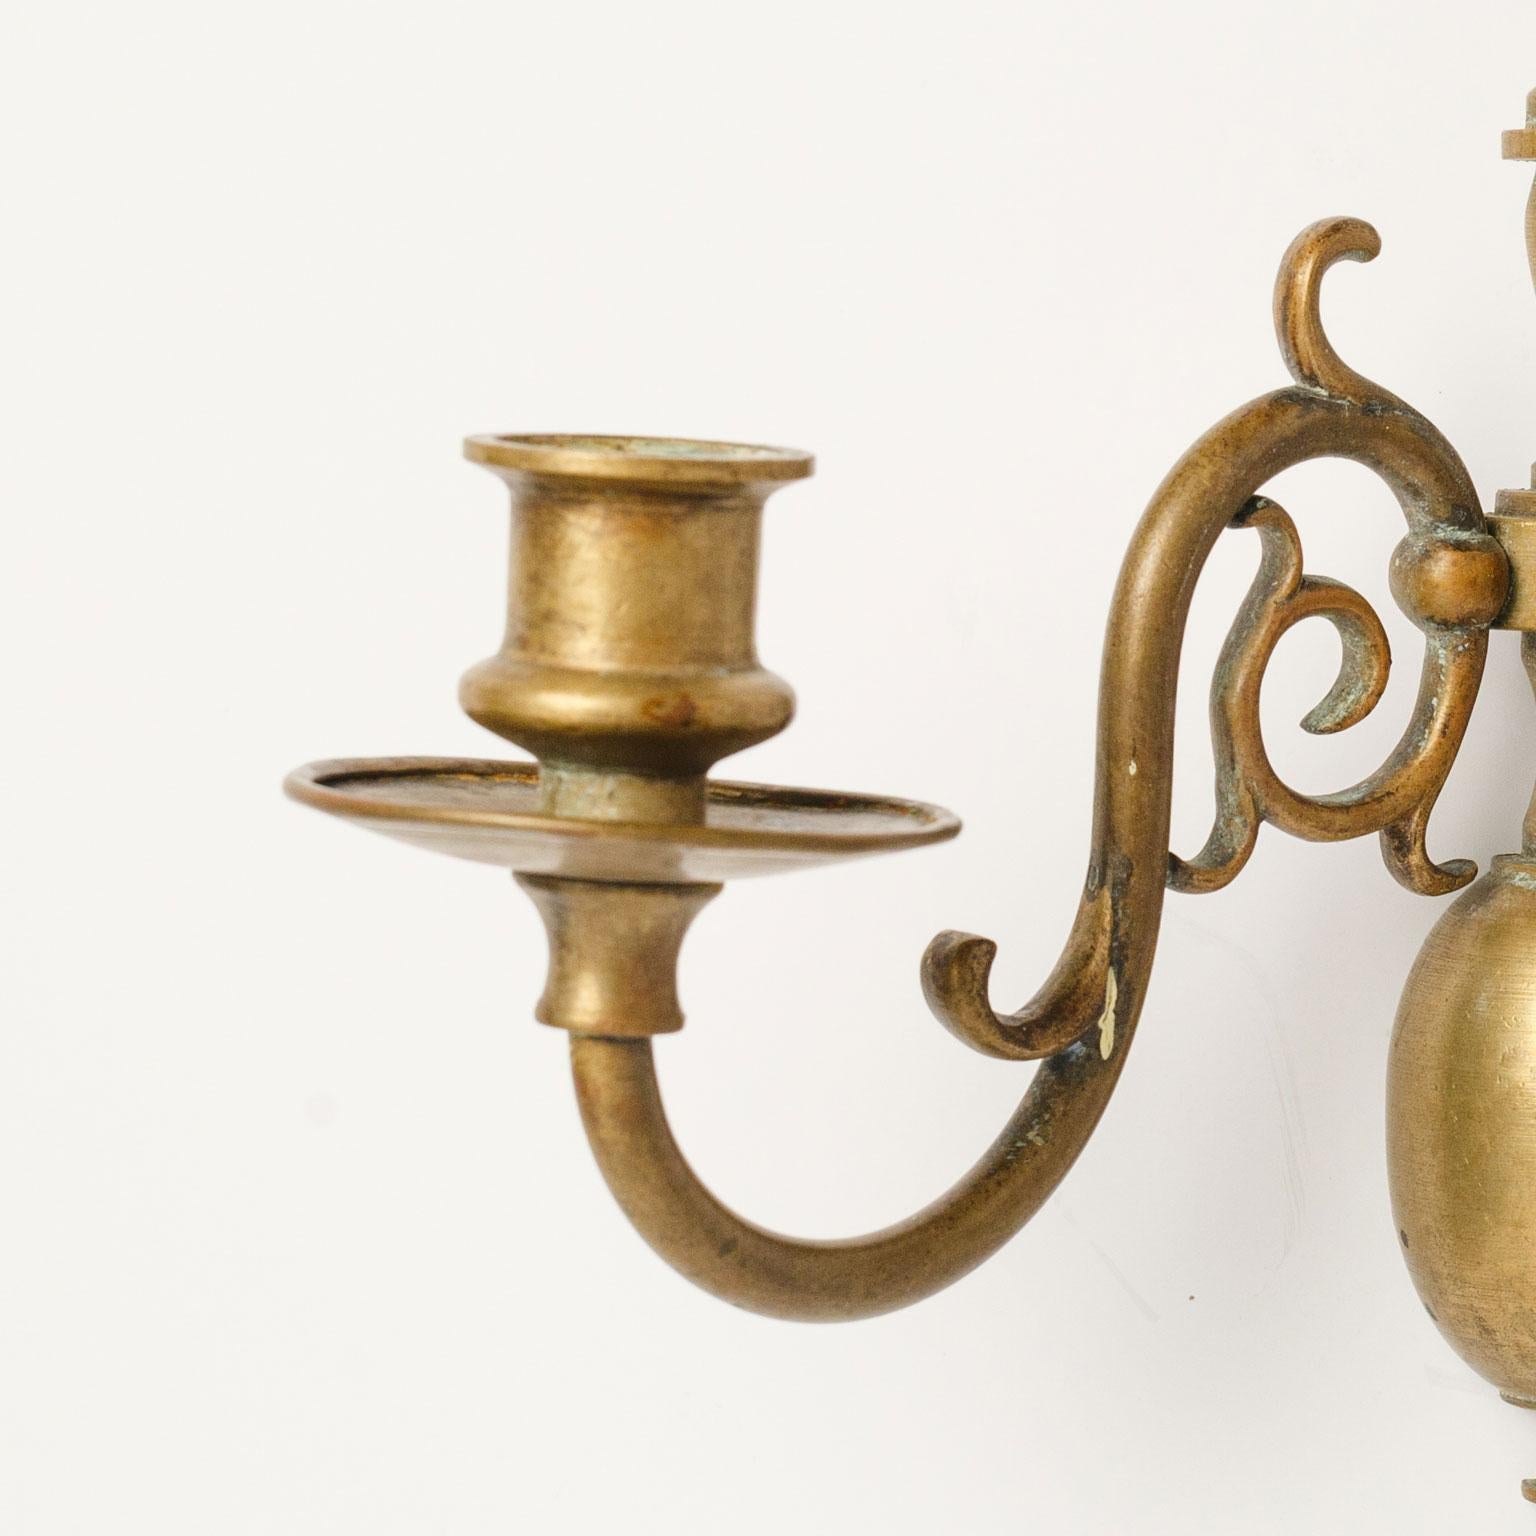 Pair of smaller-scale brass sconces with two arms each. Vintage lights in Flemish (or Dutch) style. Unwired, but can be wired for electricity for an additional cost. Sold together as a pair for $850.